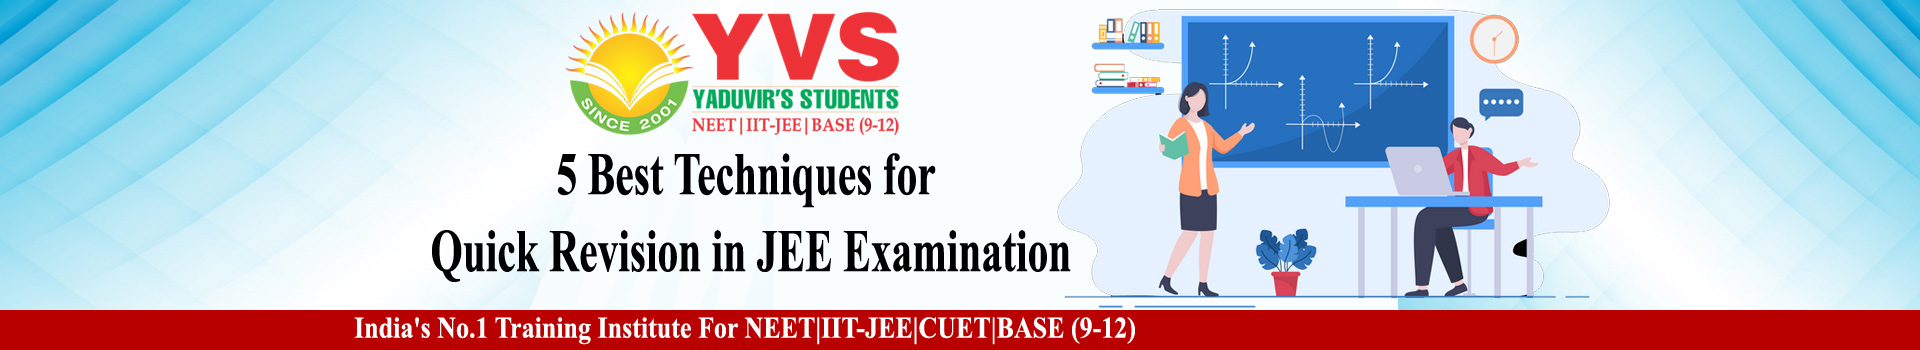 5 Best Techniques for Quick Revision in JEE Examination